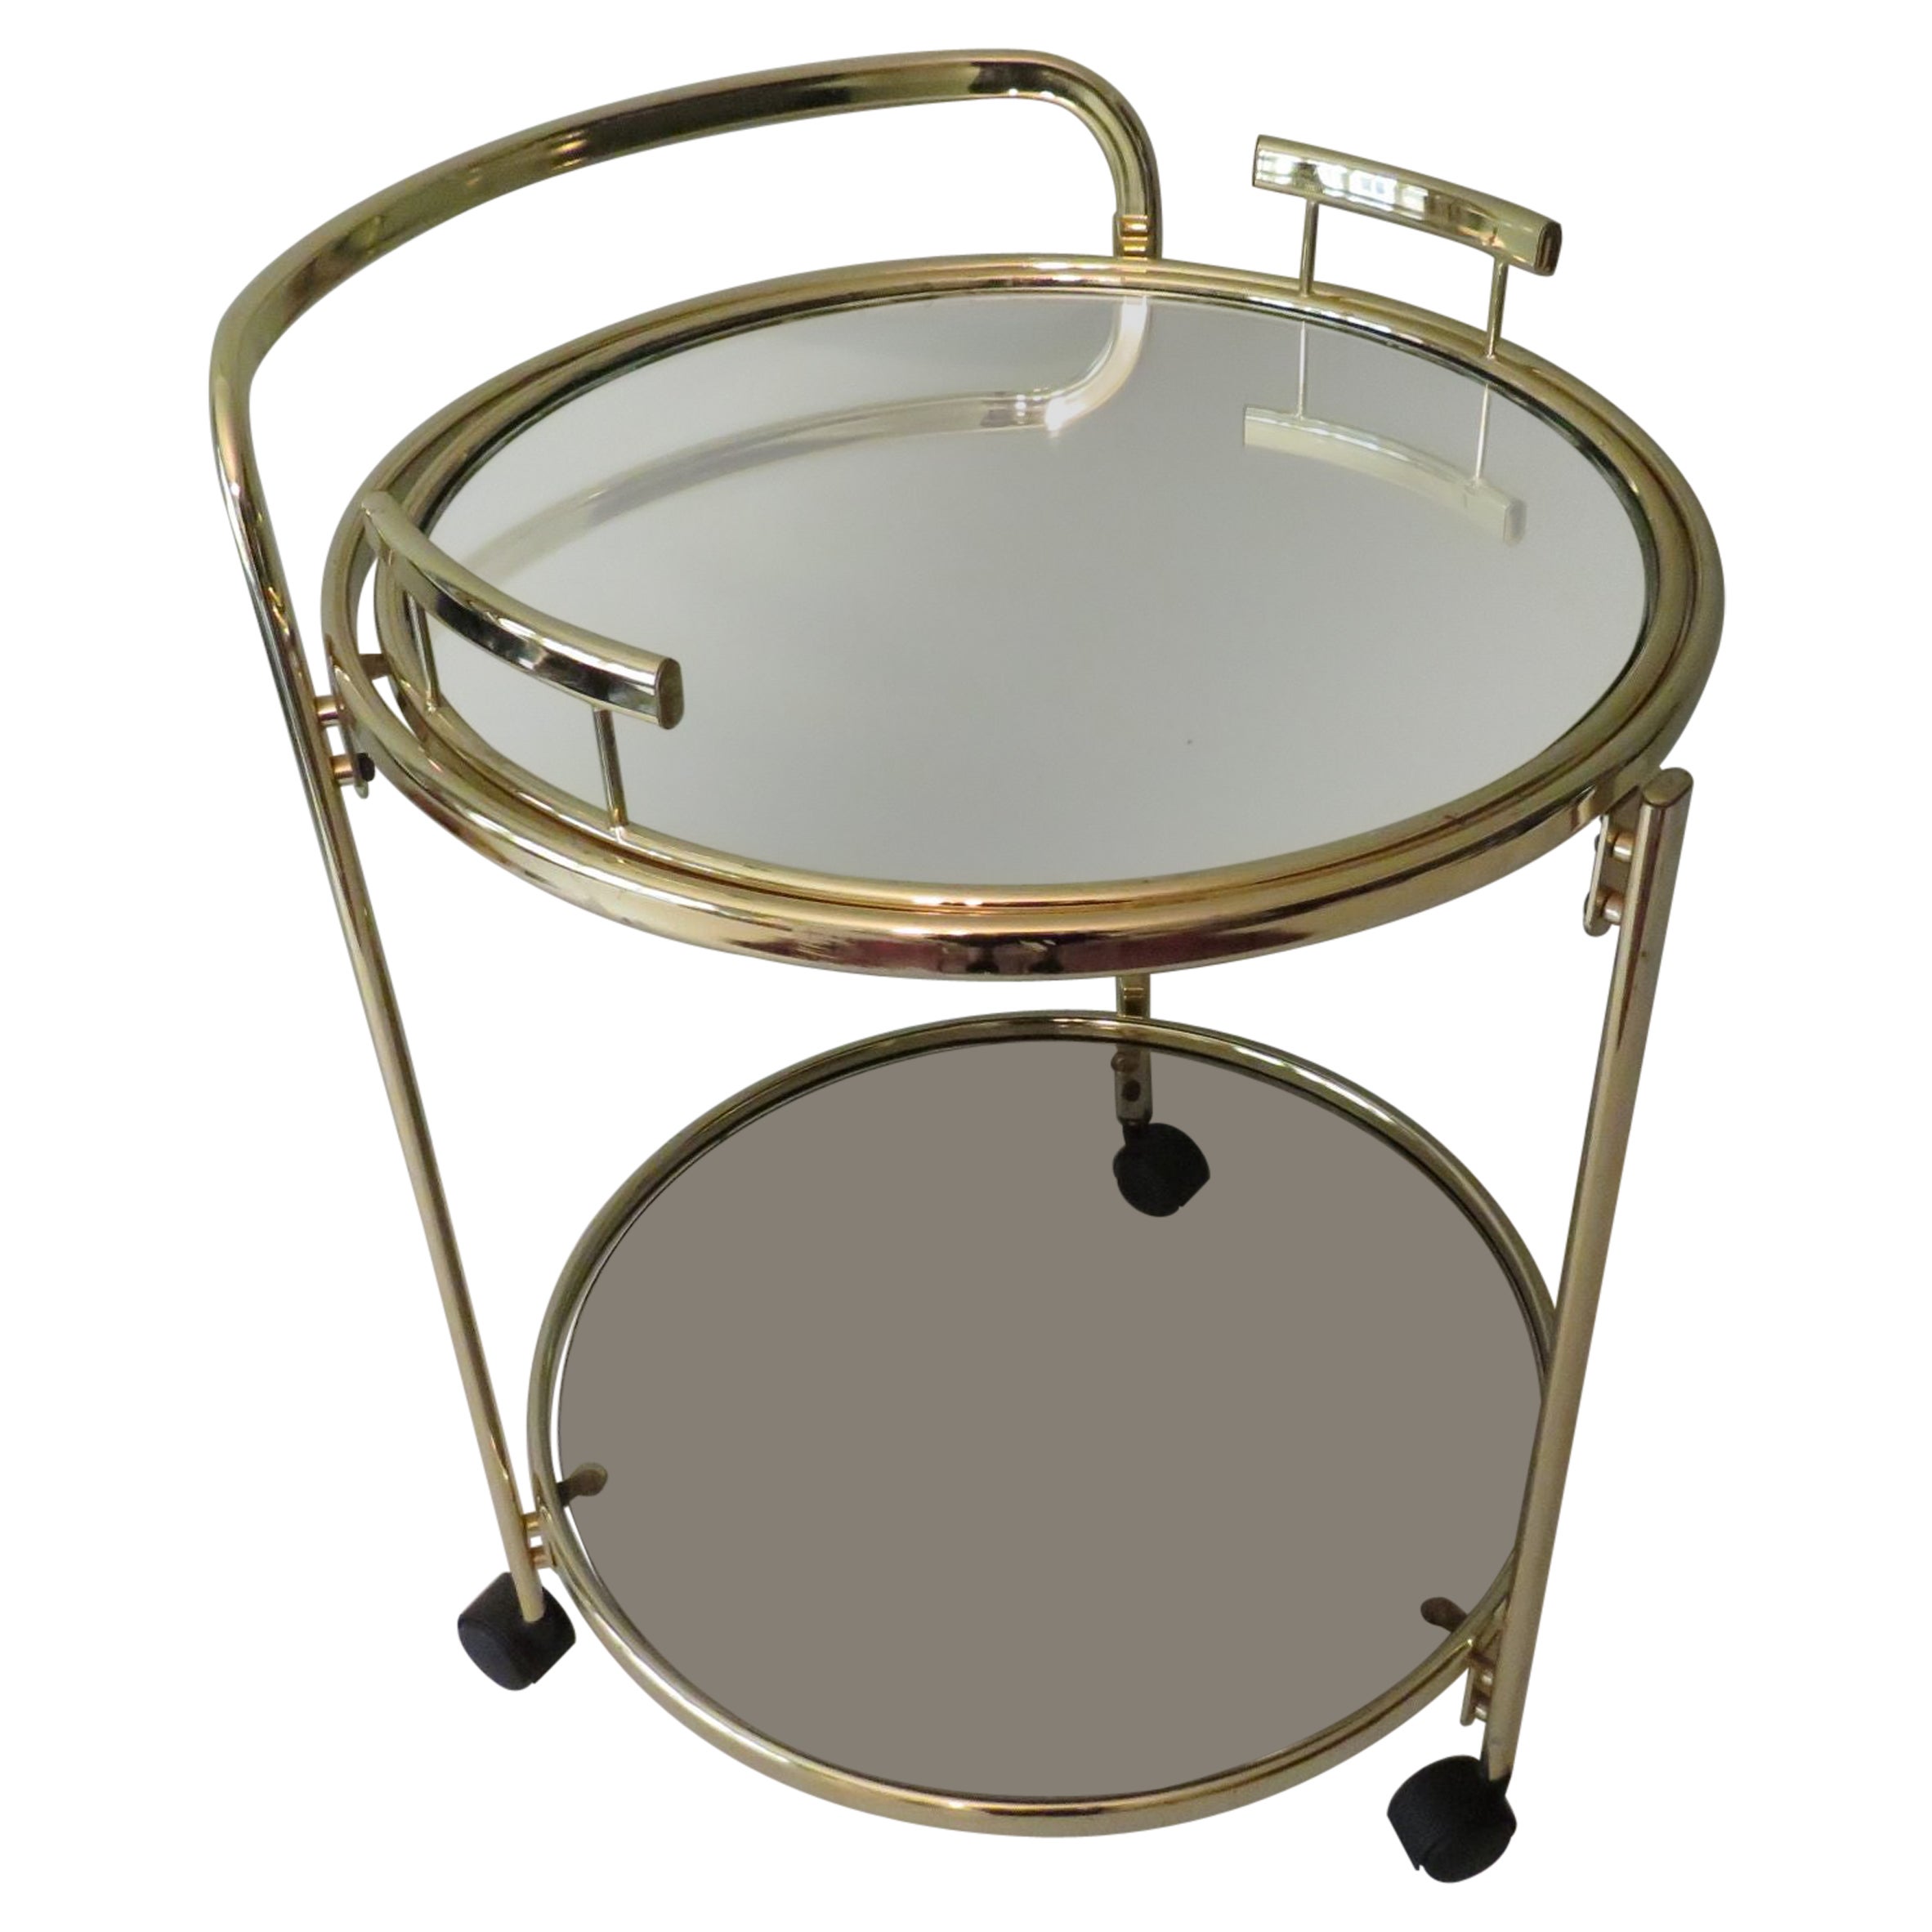 Hollywood Regency Style Serving Trolley with Removable Tray, 1970